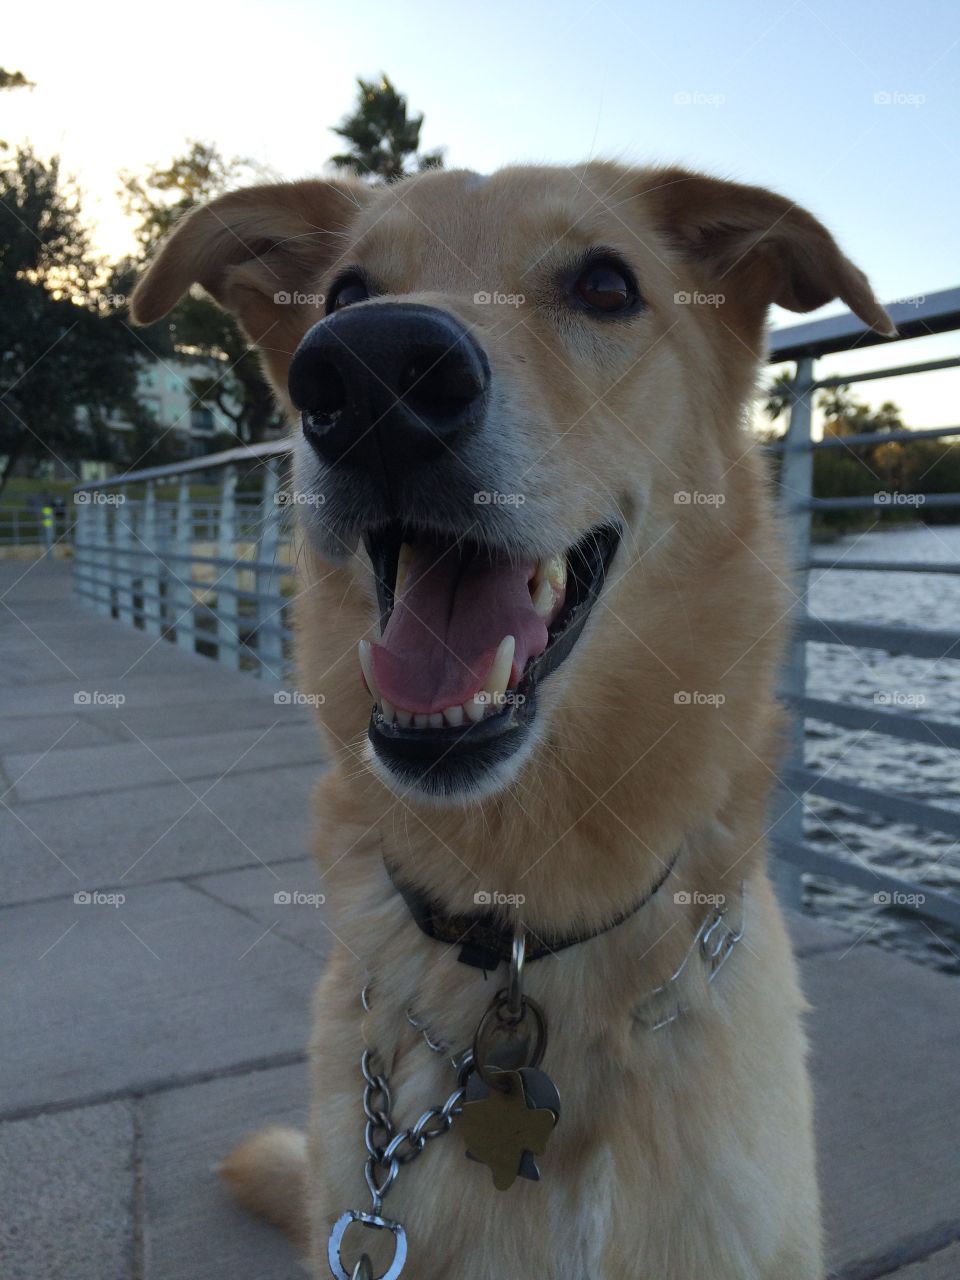 My rescue dog. Yellow Labrador / German Shepard mix. Loves the water and spending time outdoors. 